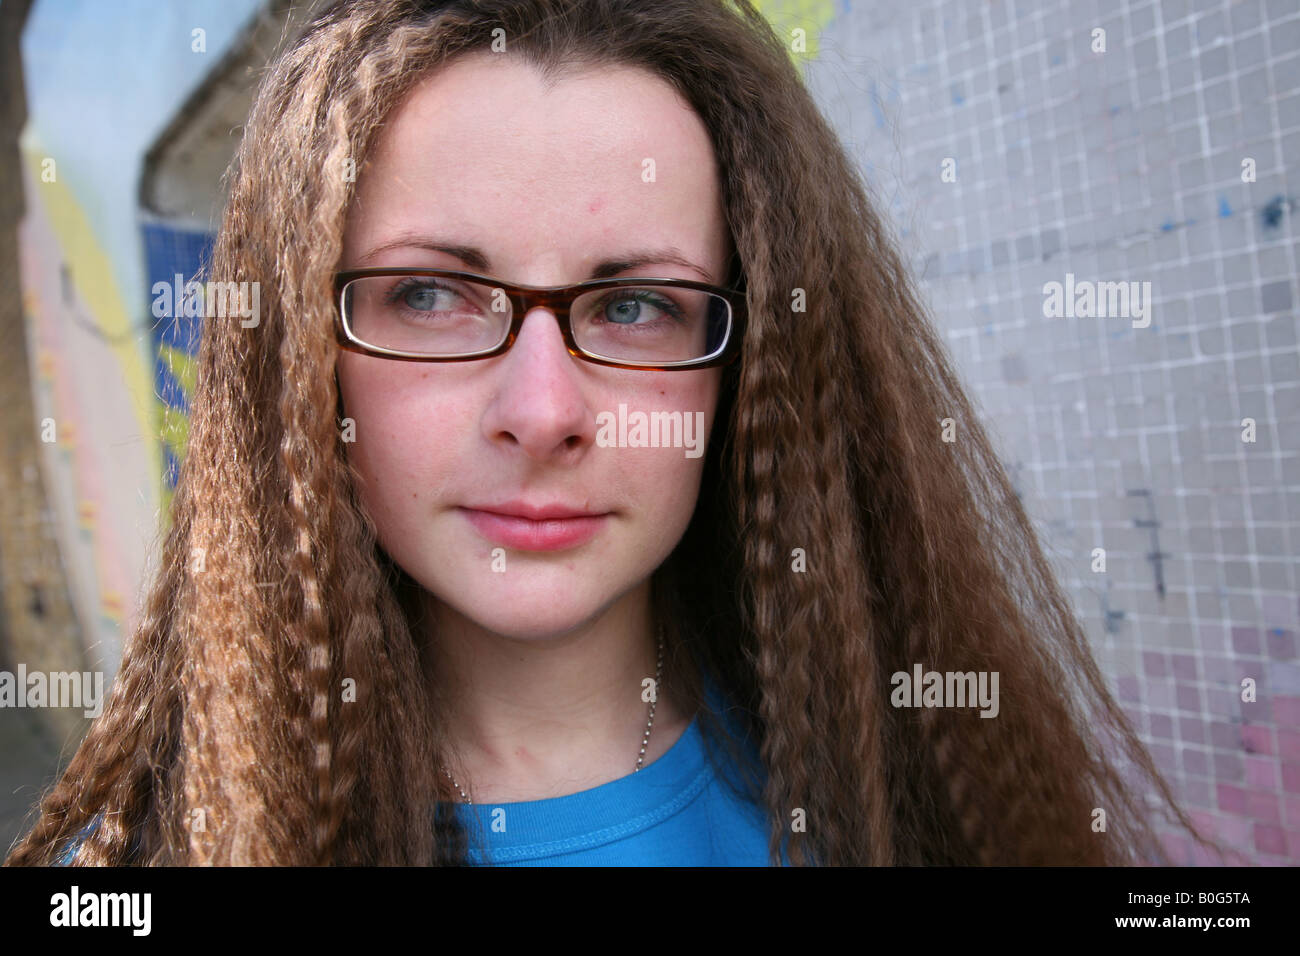 Caucasian female teenager / student looking depressed taken outside in a graffiti covered underpass on a council estate Stock Photo